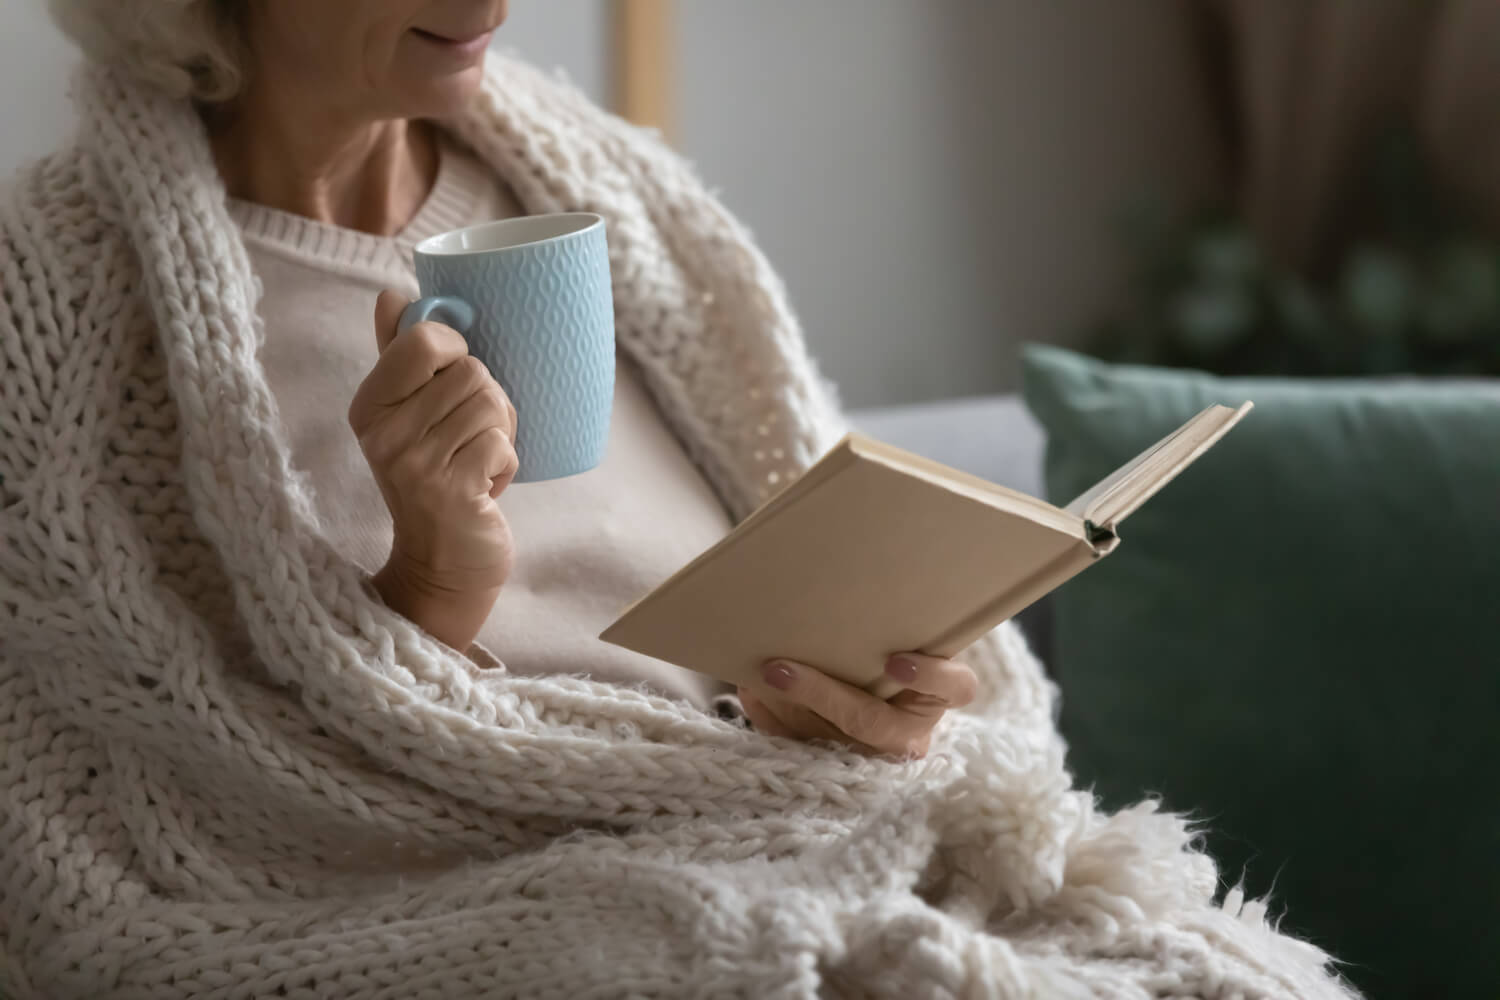 A woman recovering from vascular surgery in the winter, laying in bed with a cozy blanket, a cup of tea, and reading a book.